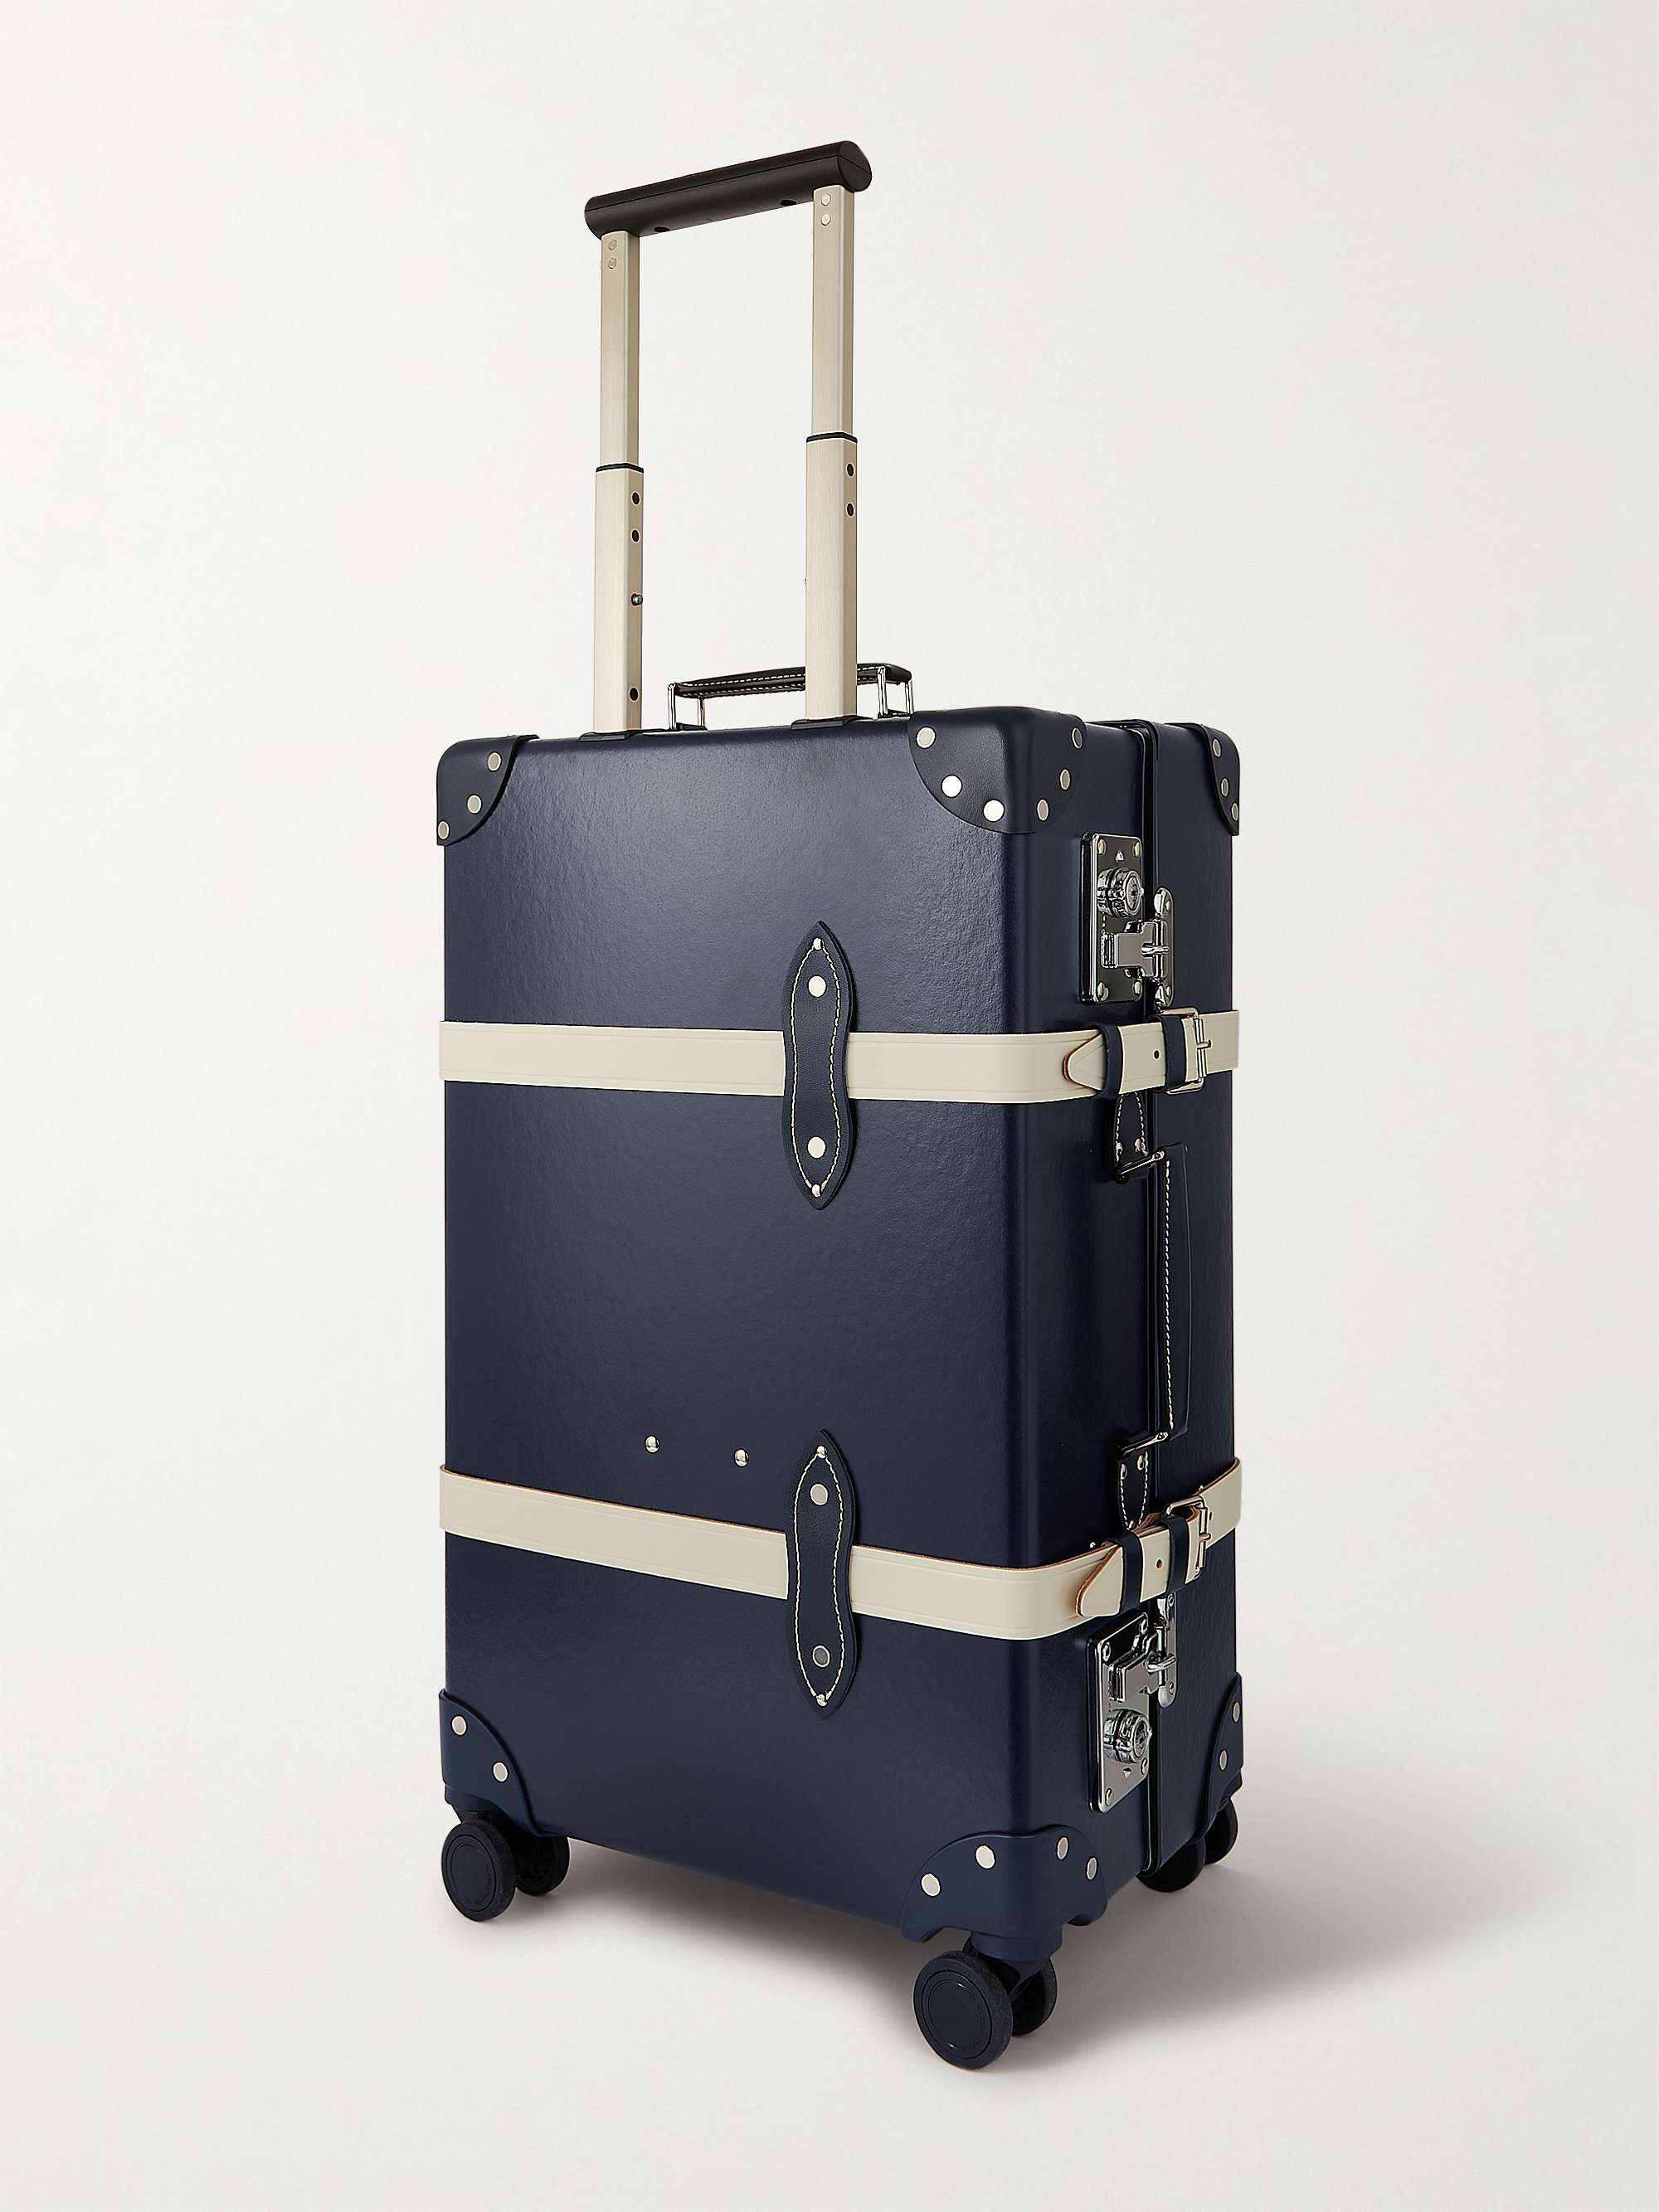 GLOBE-TROTTER Centenary 15" Leather-Trimmed Suitcase